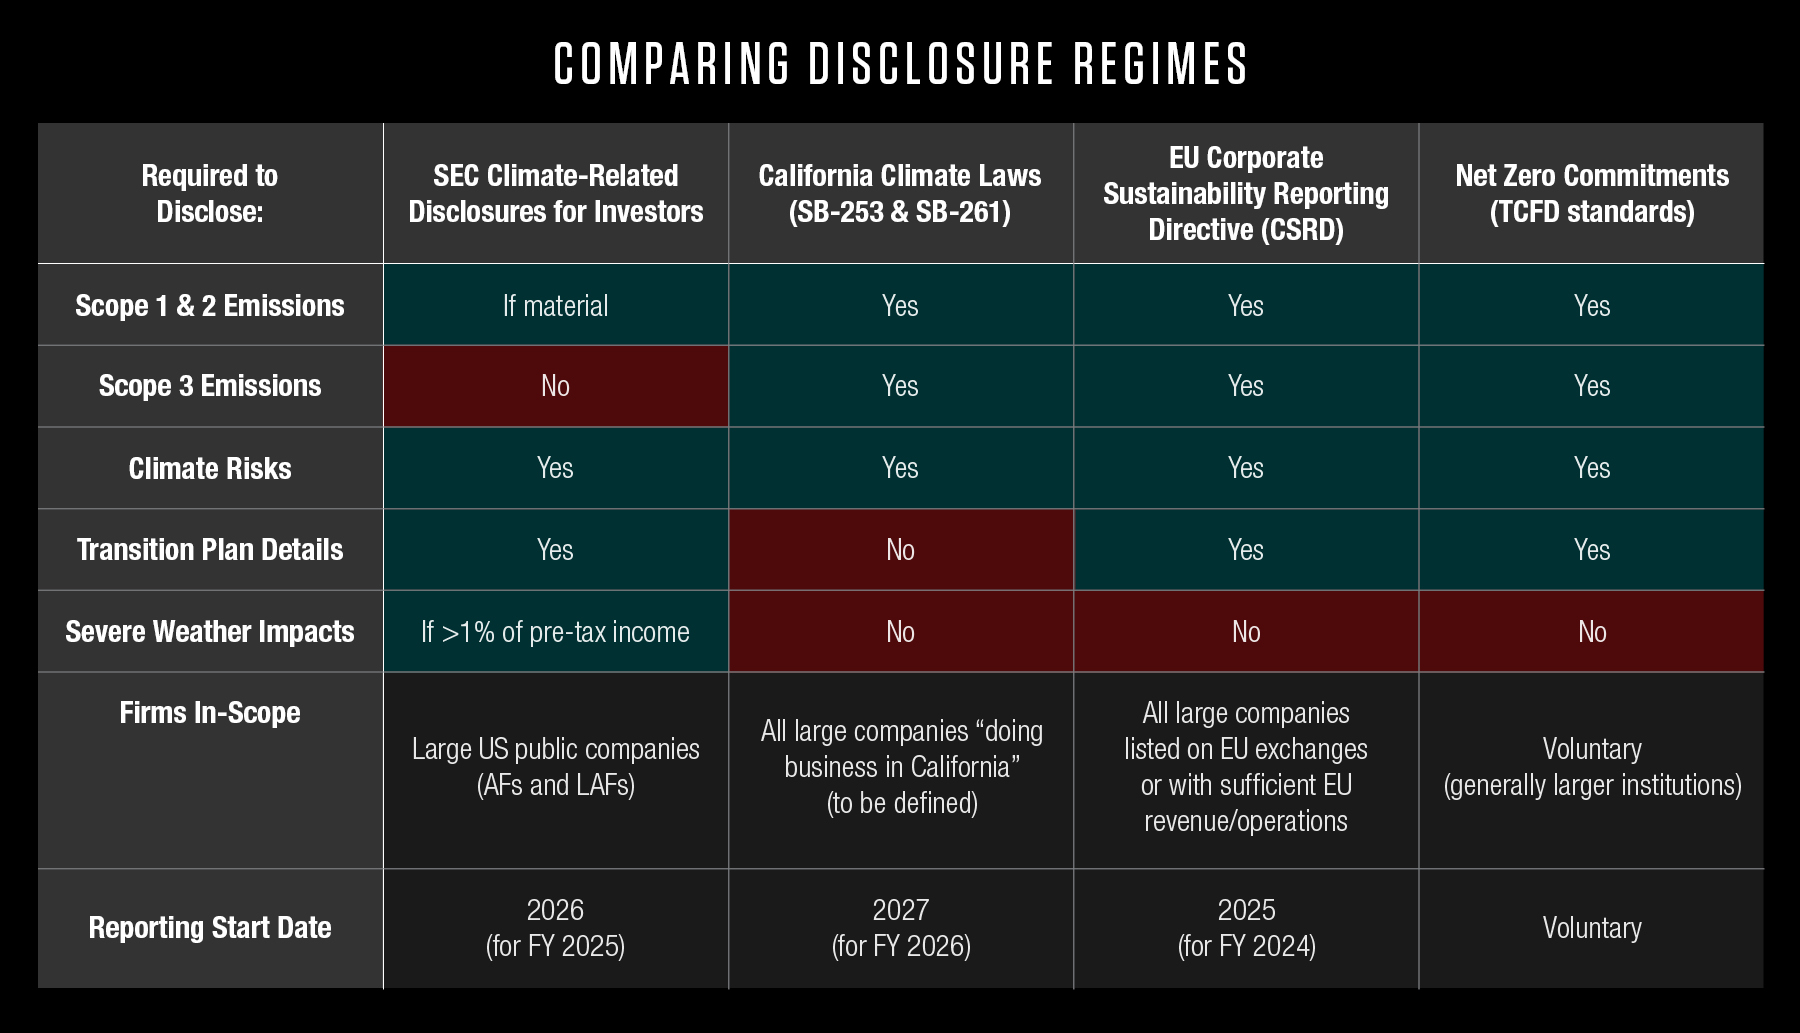 Comparing Disclosure Regimes: The SEC's Climate-Related Disclosures: implications for FS firms